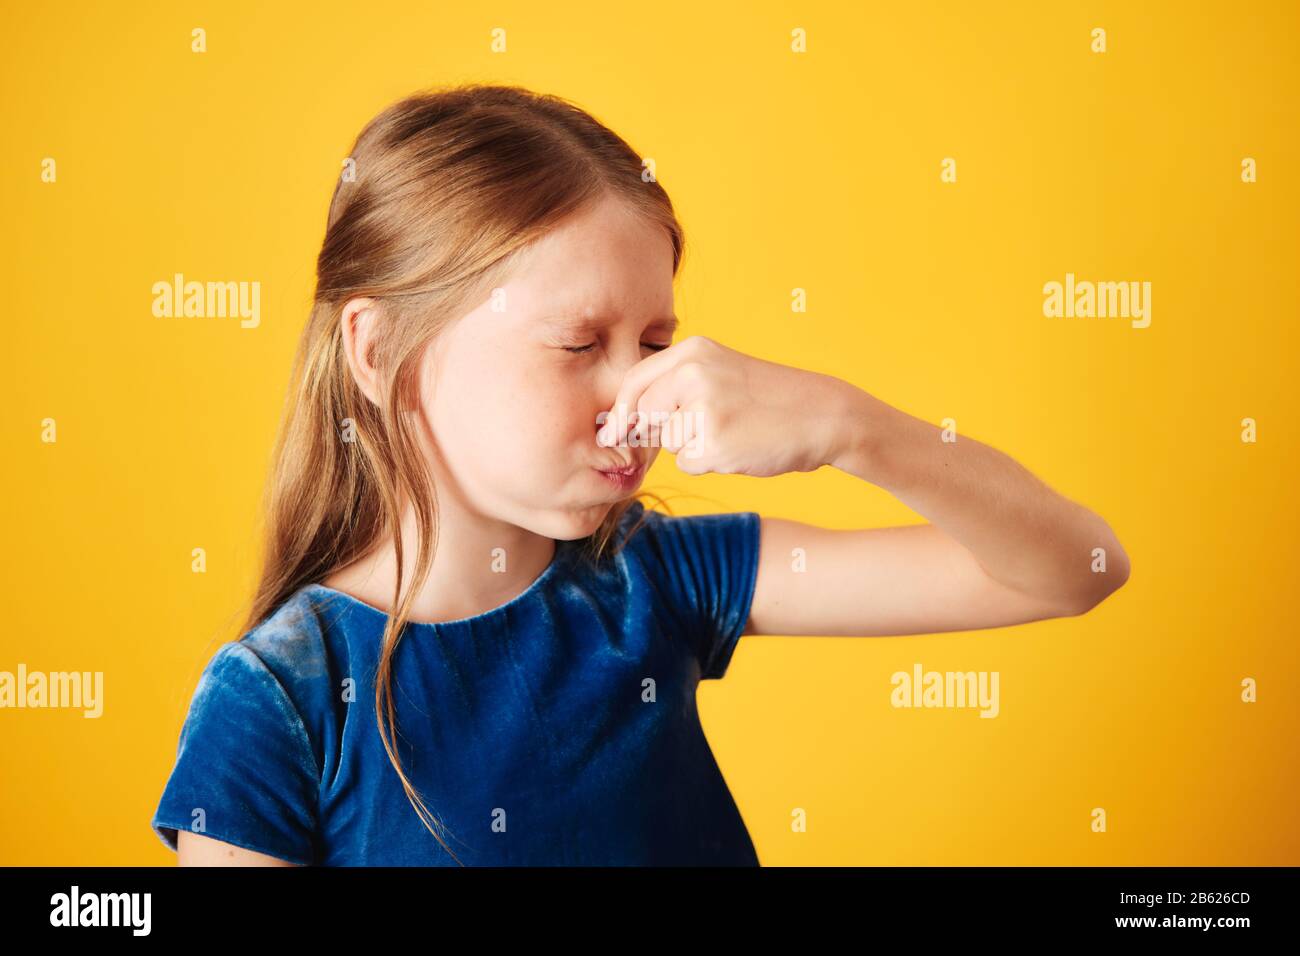 Little Redhead Girl Covering Nose For Bad Smell Stock Photo